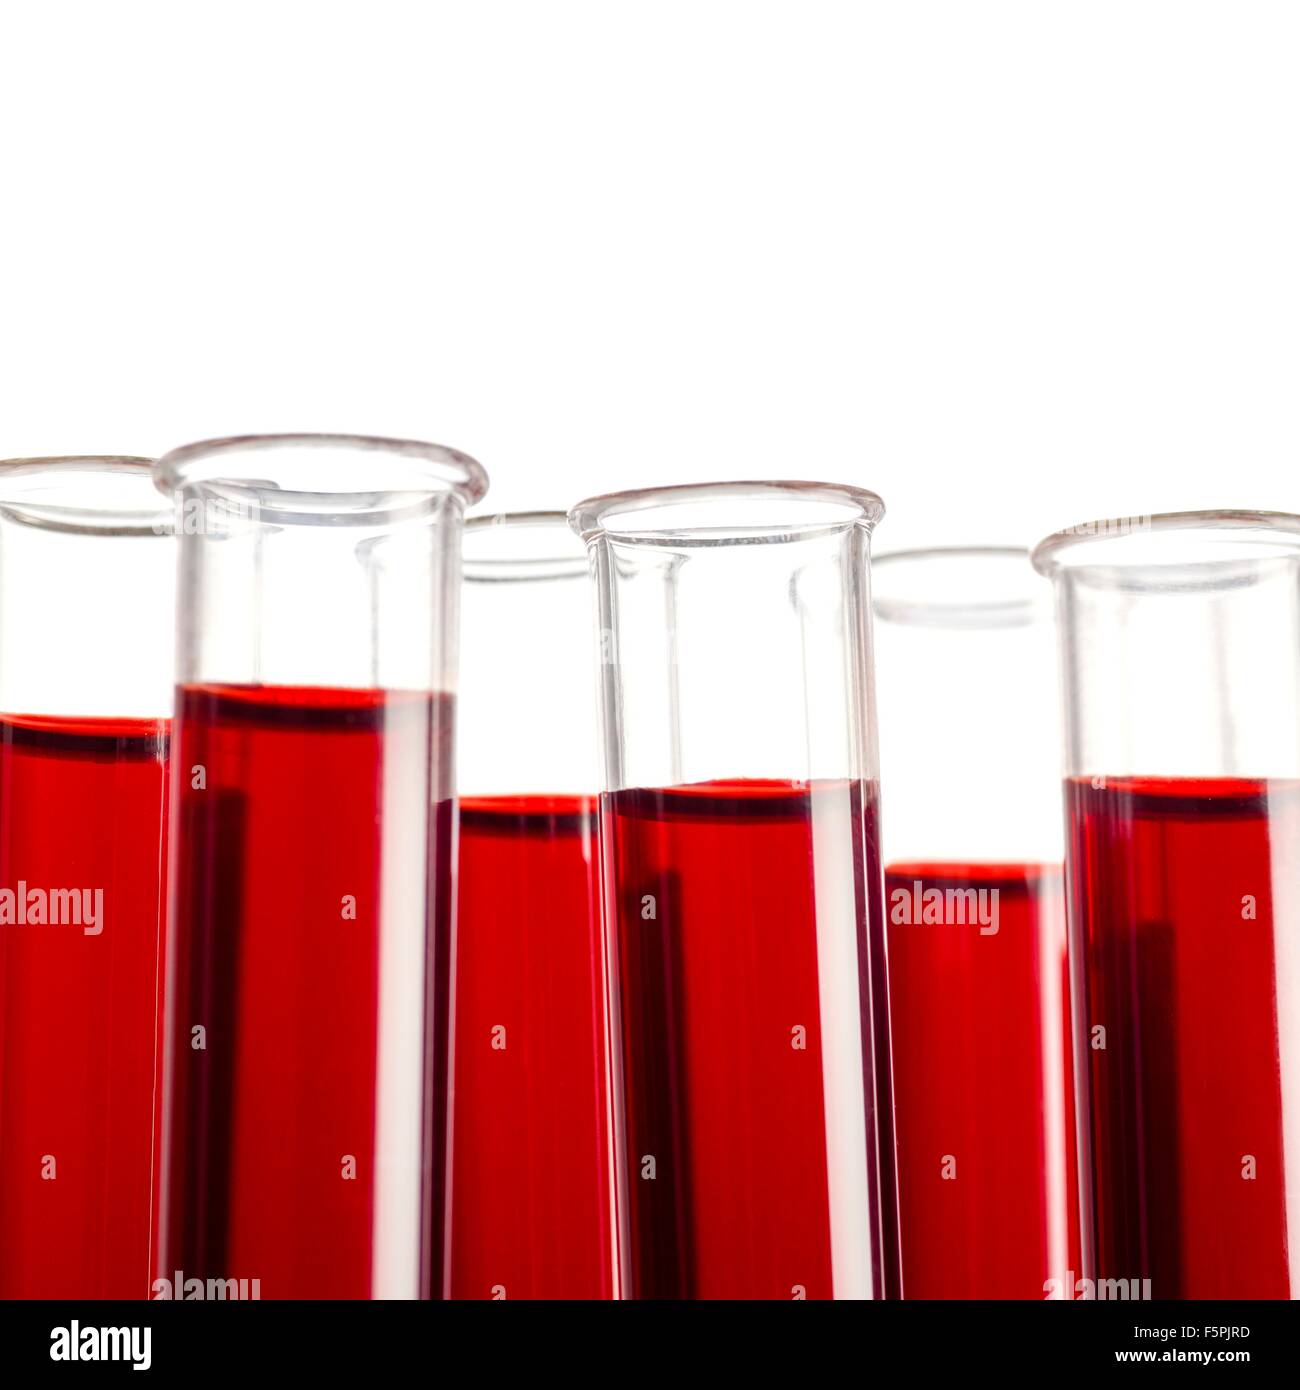 Blood samples in test tubes. Stock Photo